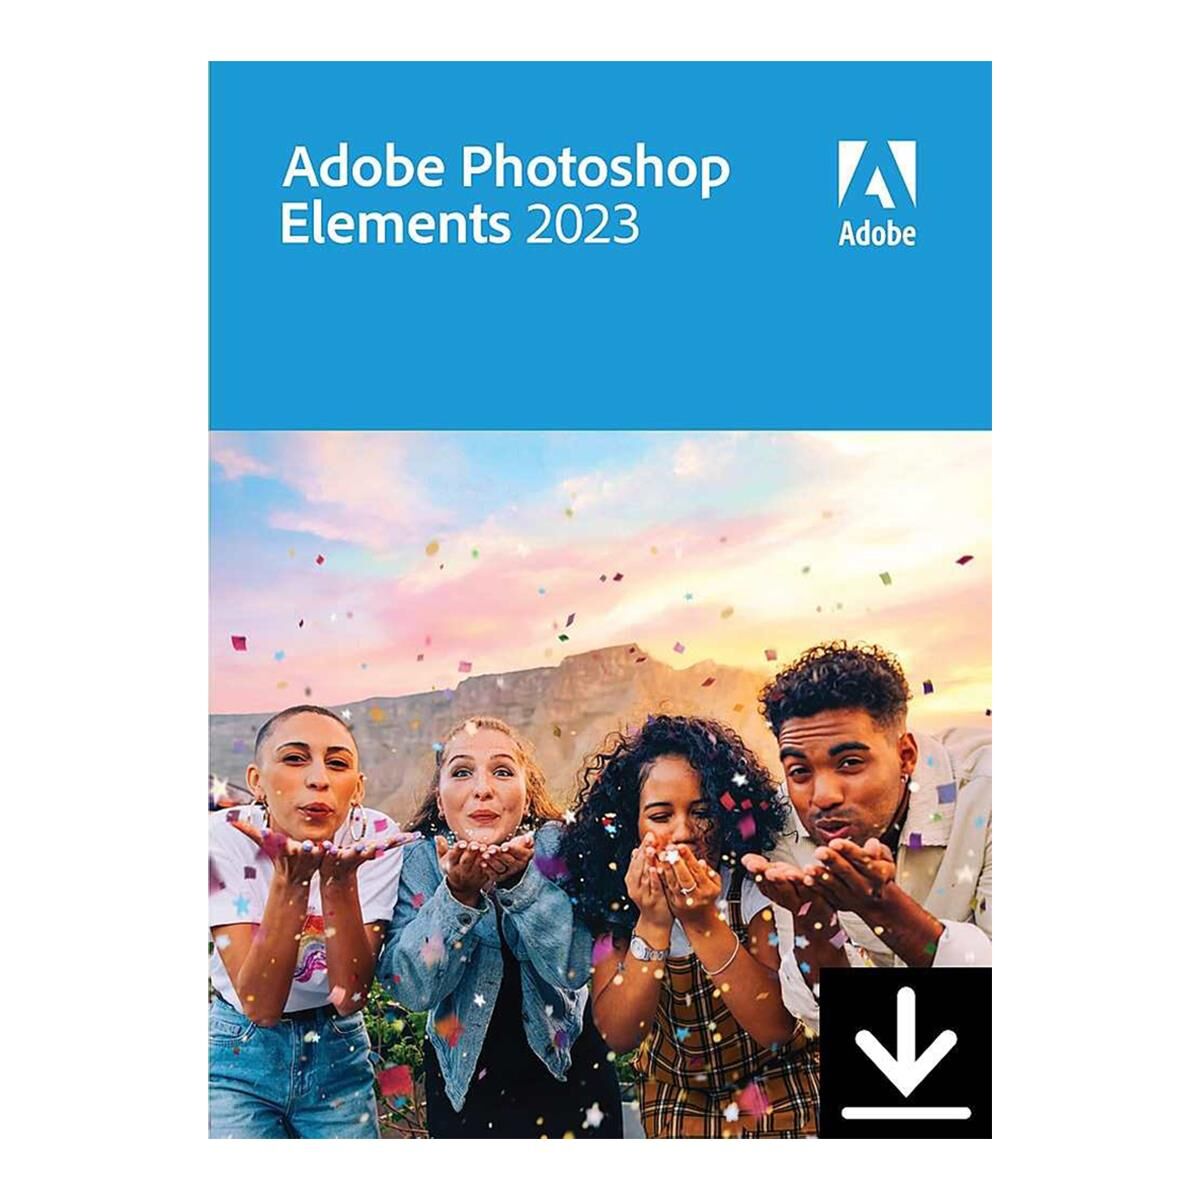 Adobe Photoshop Elements 2023 Perpetual License for Windows, Download